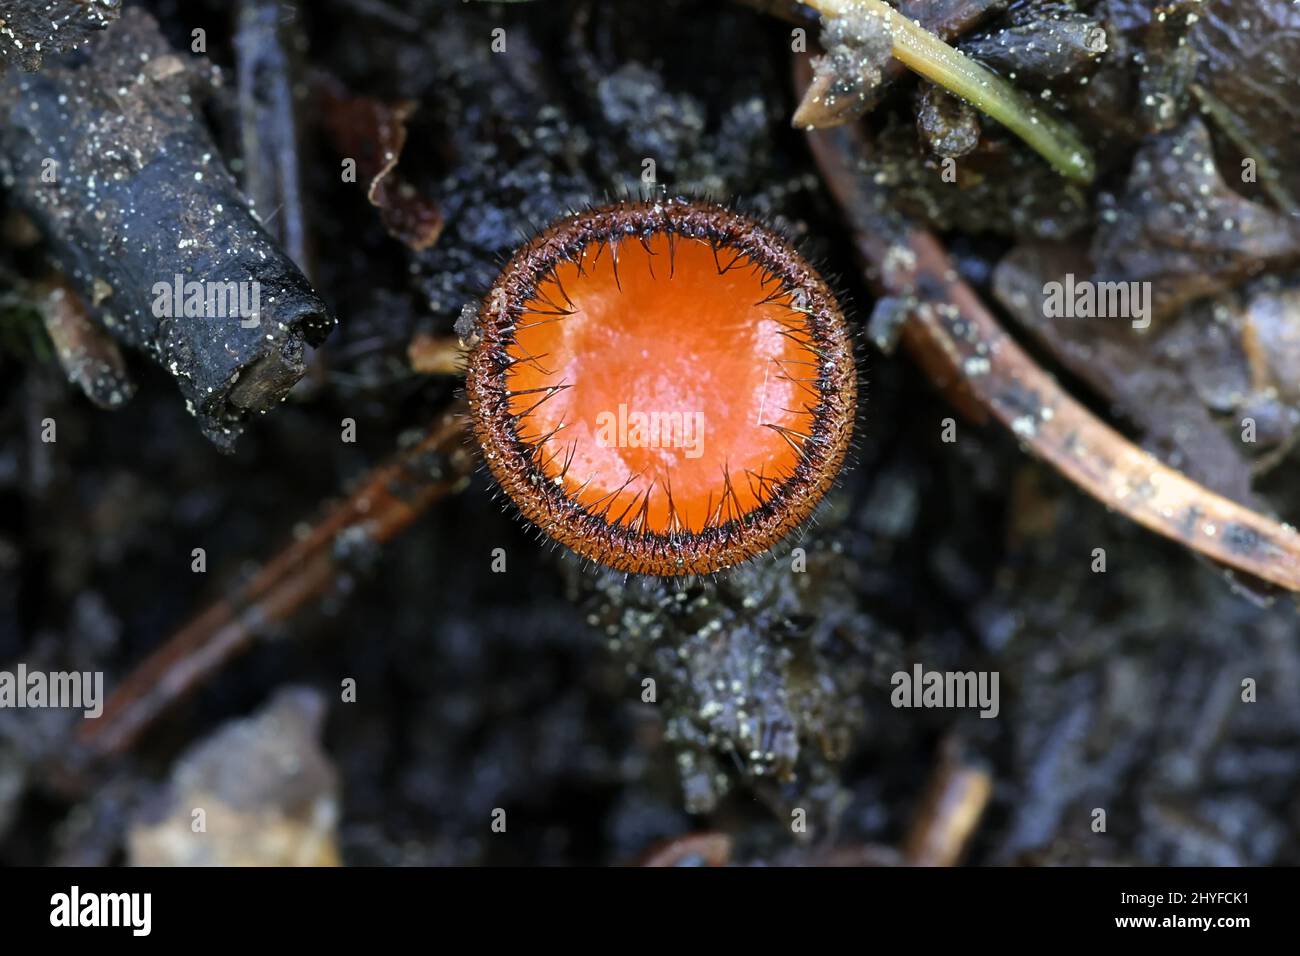 Scutellinia scutellata, commonly known as the eyelash cup, the Molly eye-winker, the scarlet elf cap, the eyelash fungus or the eyelash pixie cup, wil Stock Photo